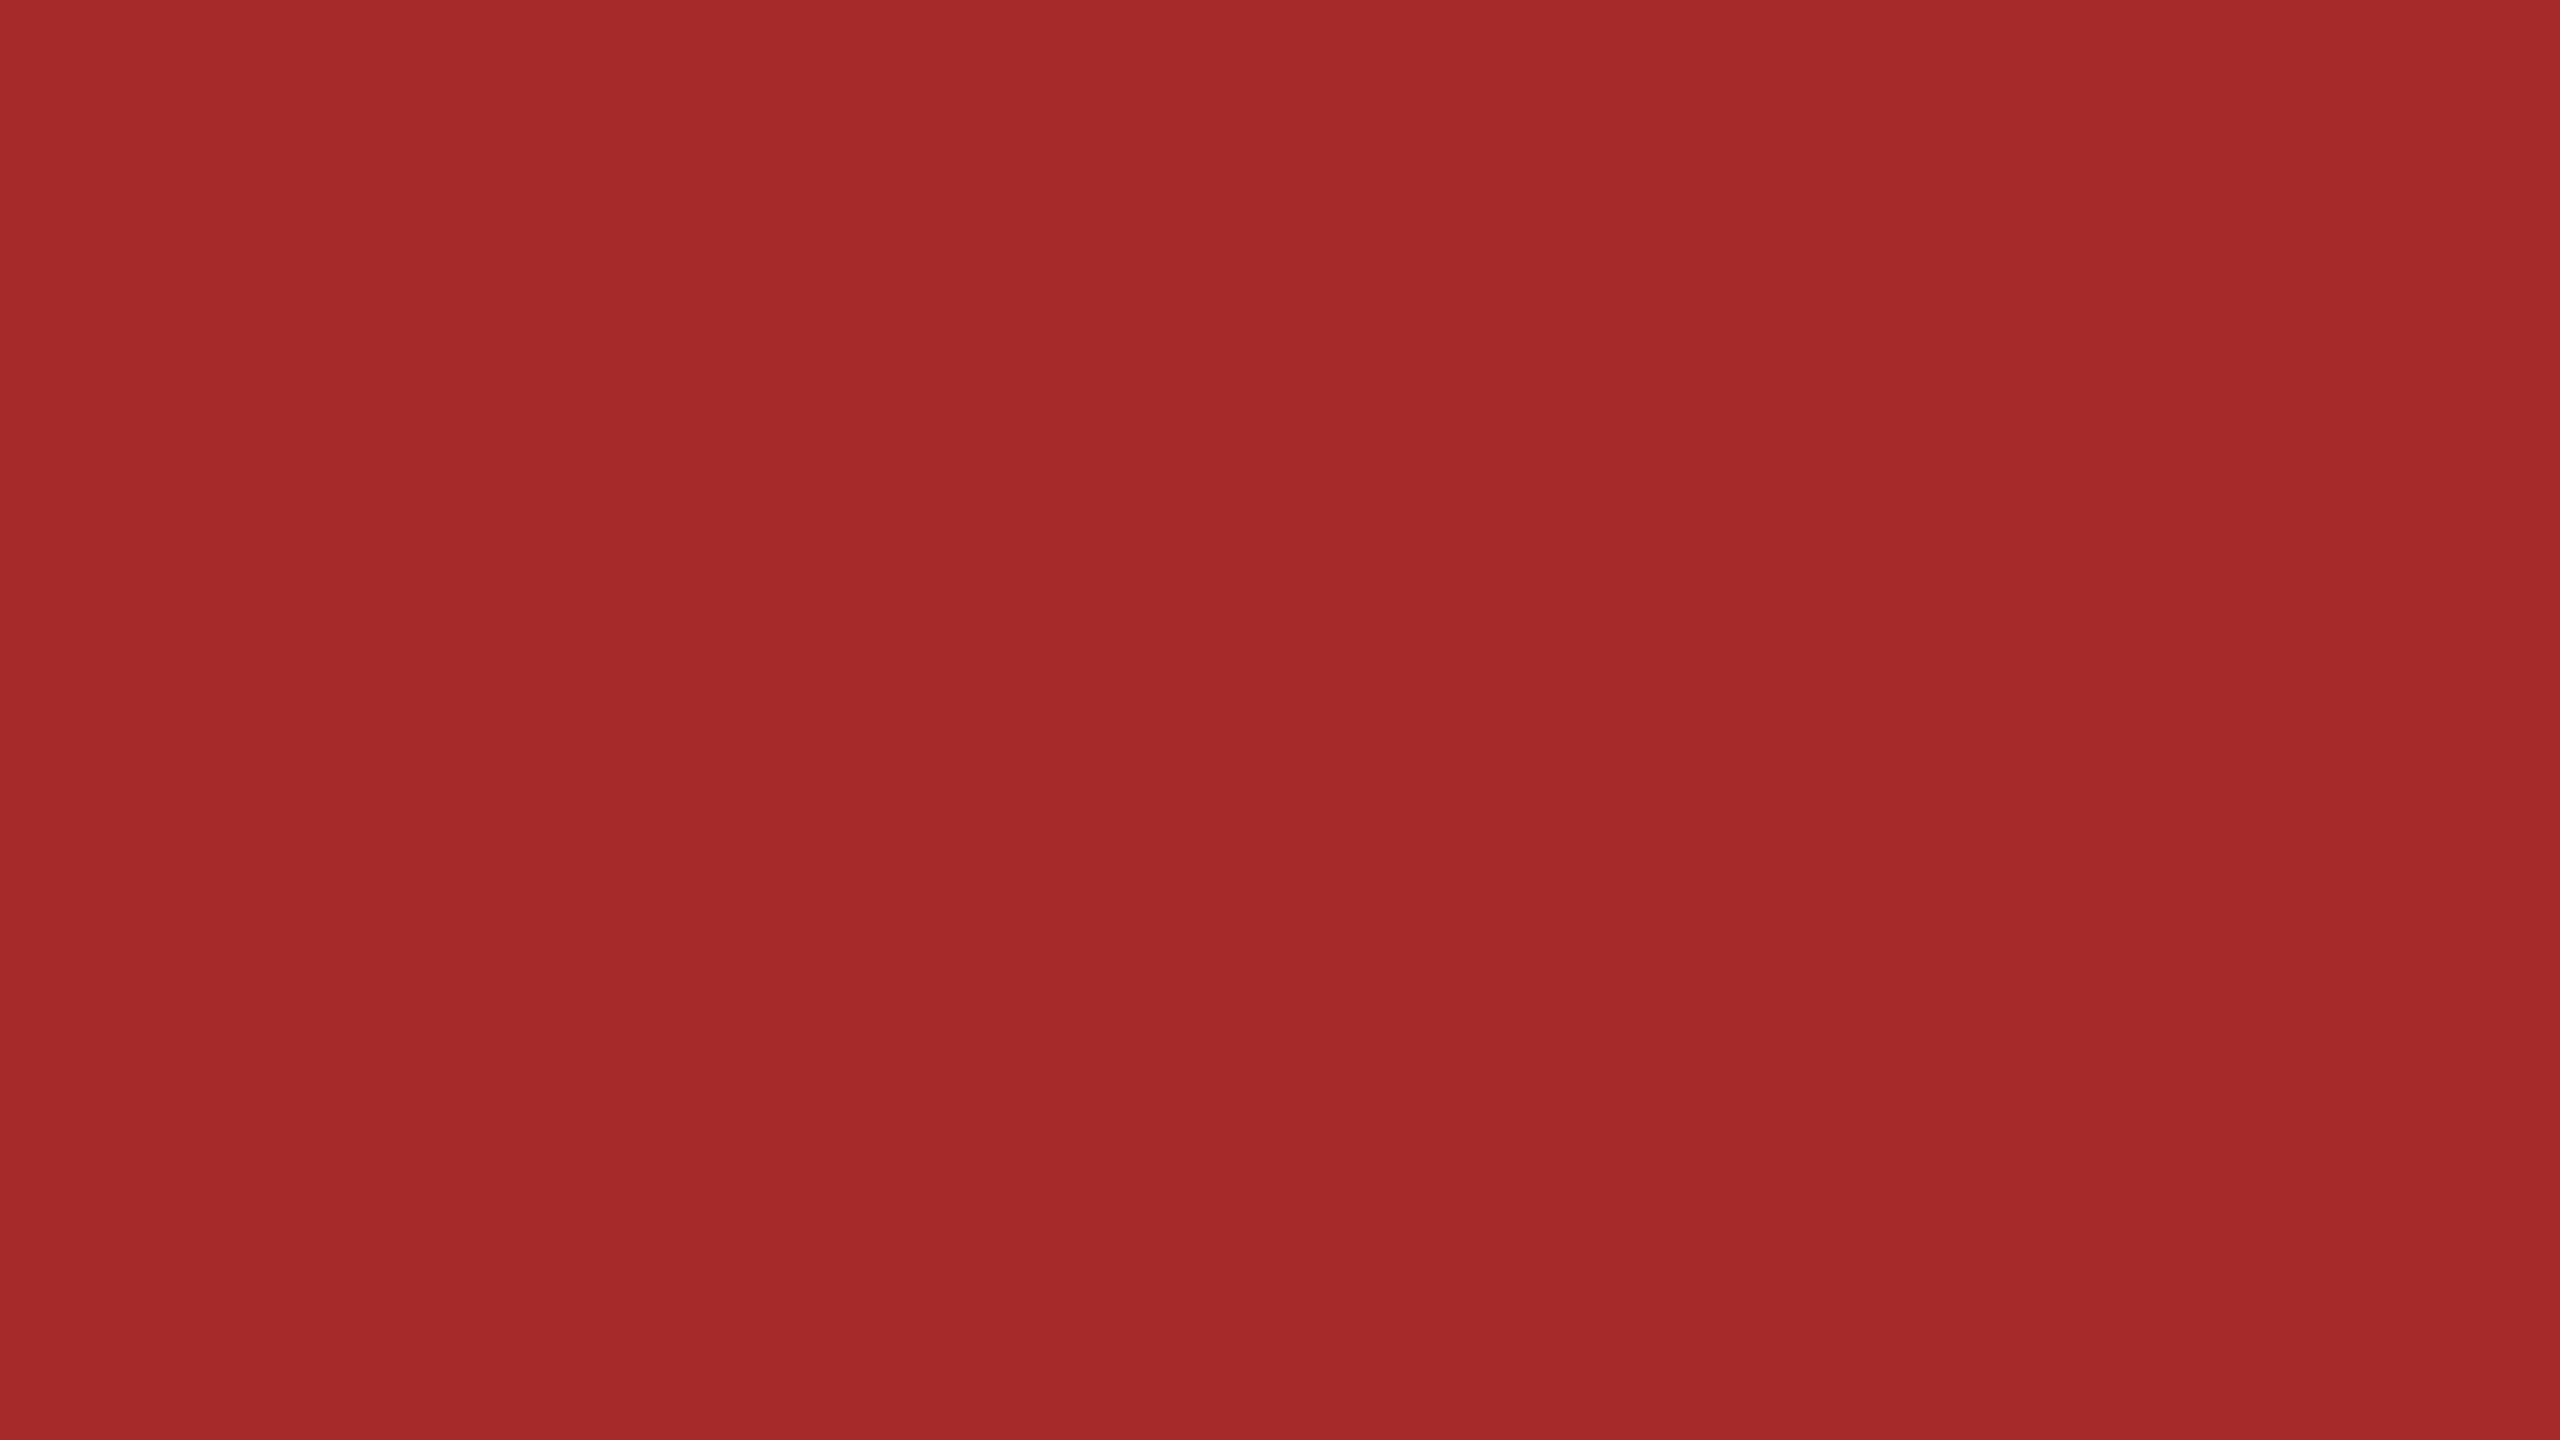 2560x1440 Red-brown Solid Color Background